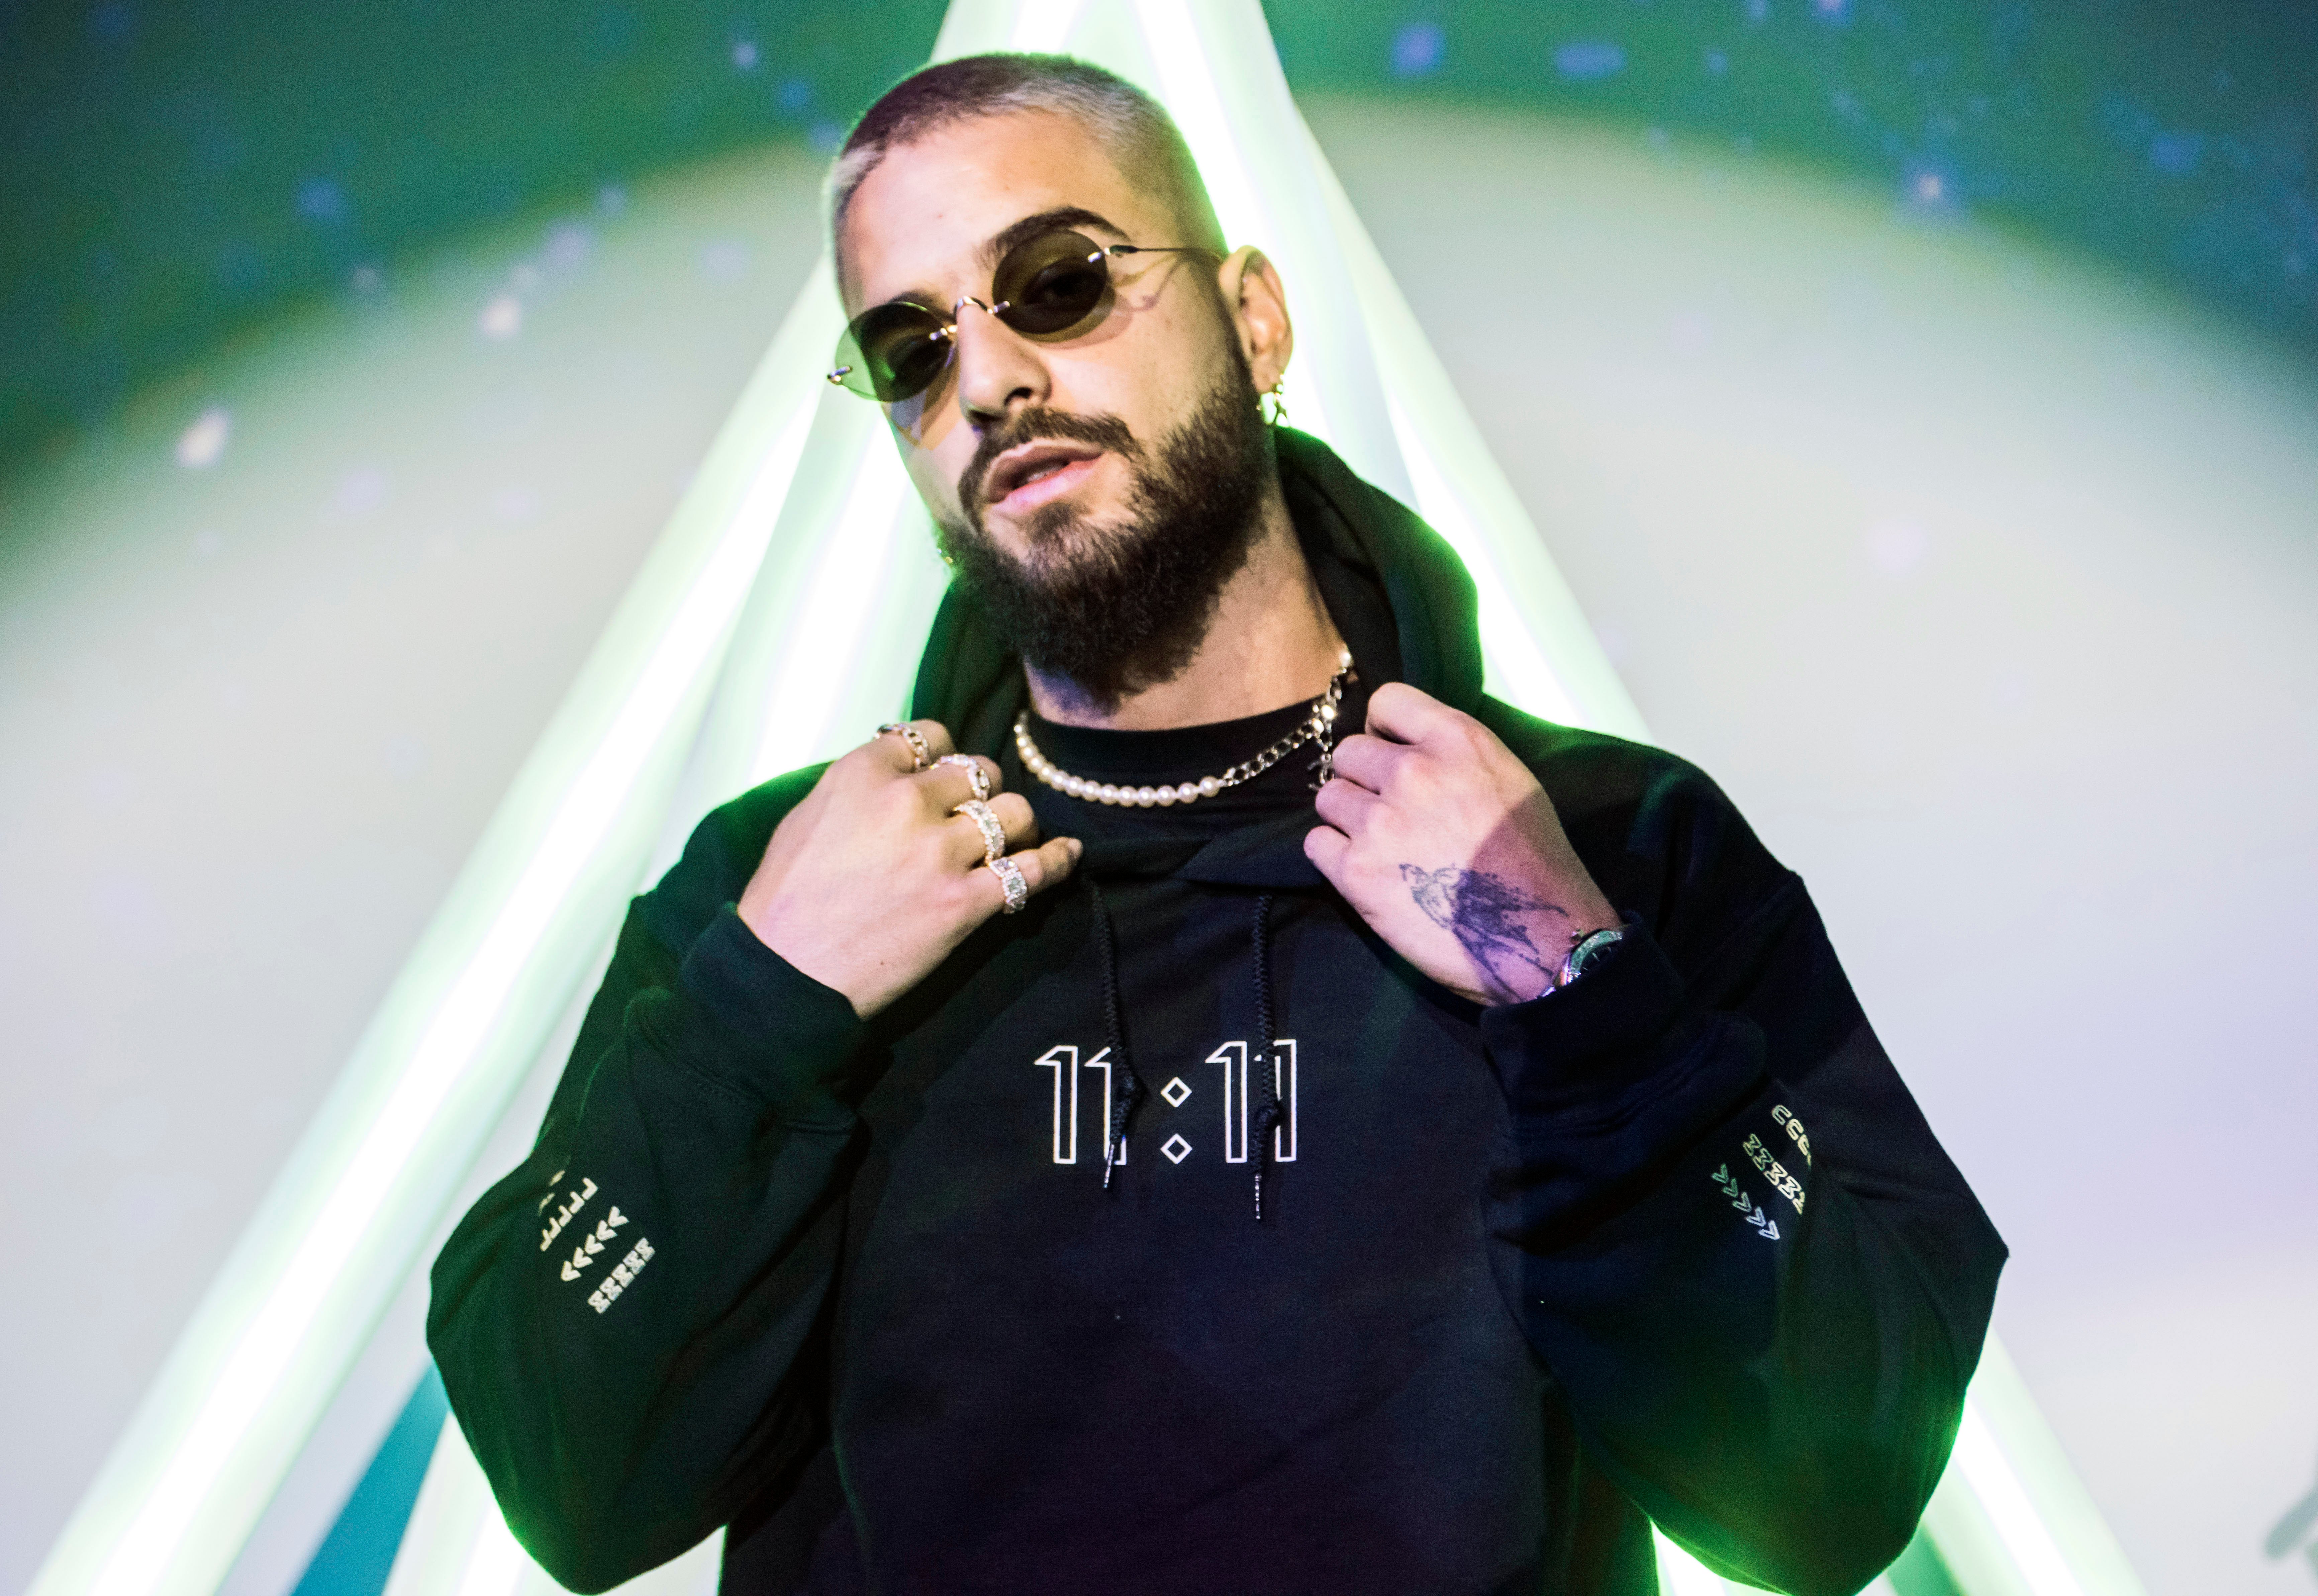 Dsquared2 Collaborates with Colombian Reggaeton Star Maluma on Tour Outfits